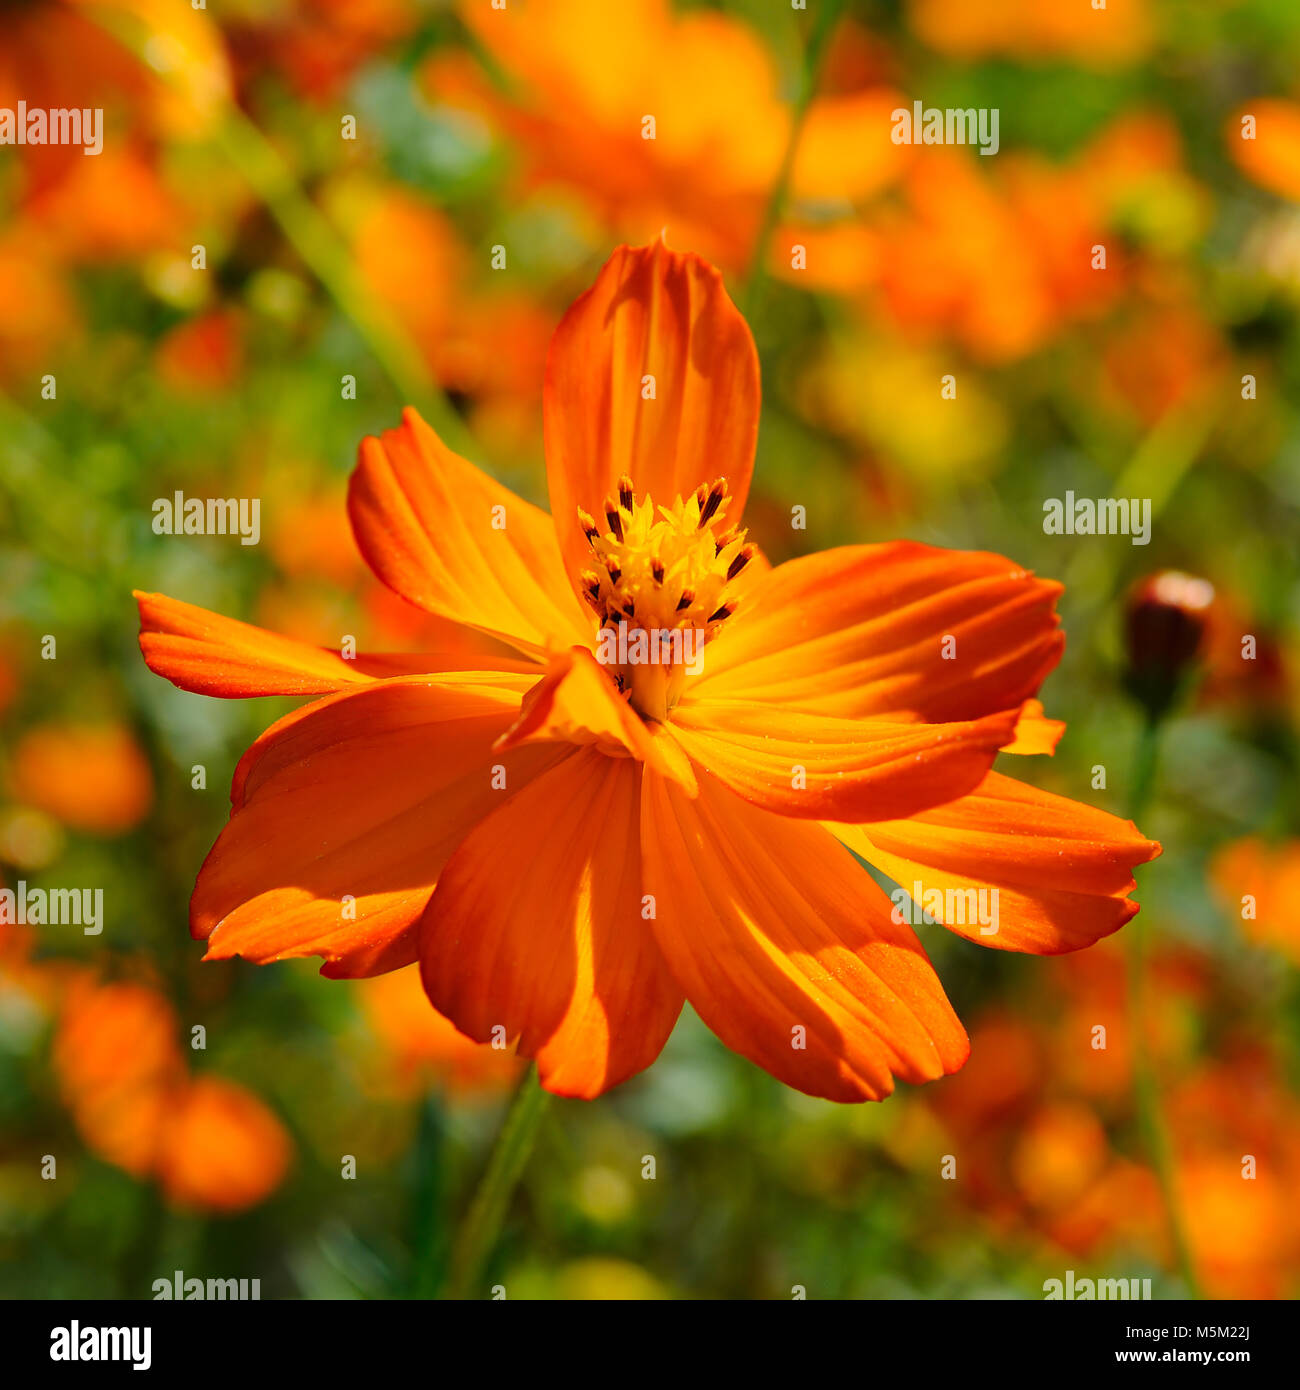 Bright corolla flower, petals around the pistil and stamens. Focus on the main subject. Shallow depth of field. Stock Photo